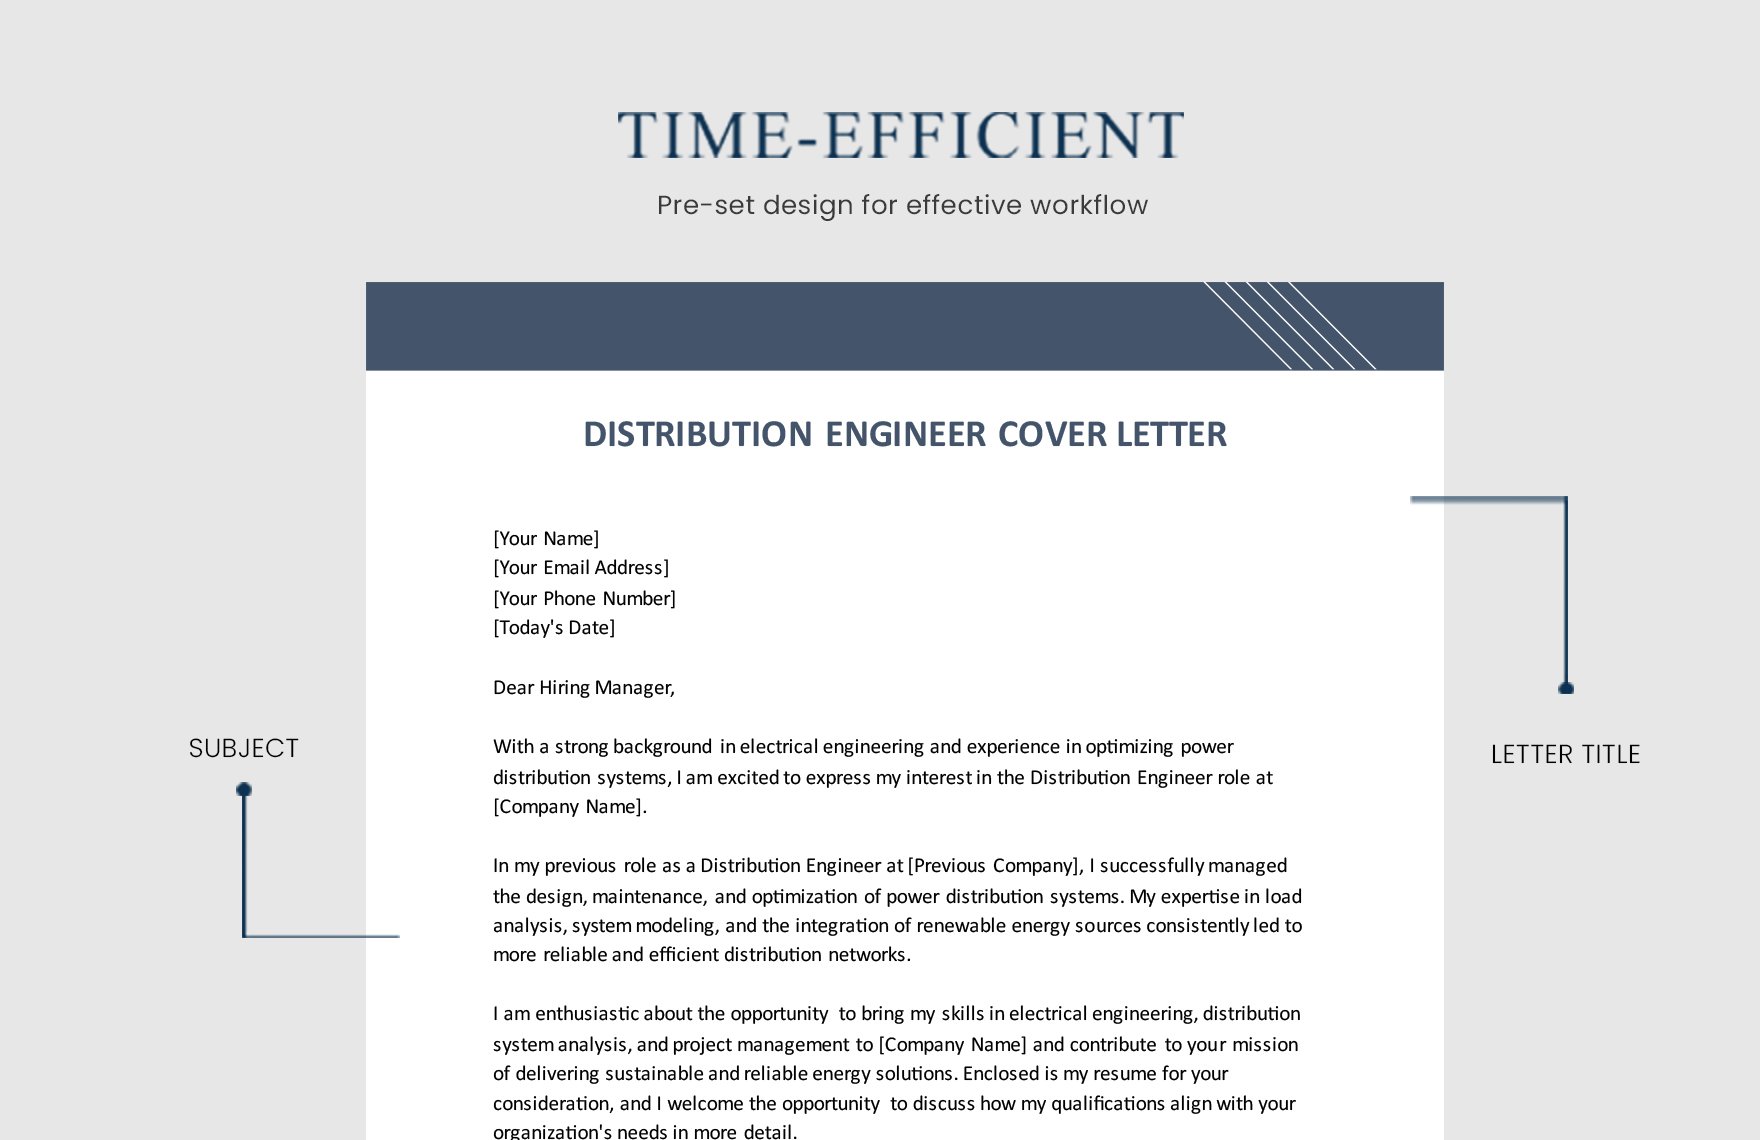 Distribution Engineer Cover Letter